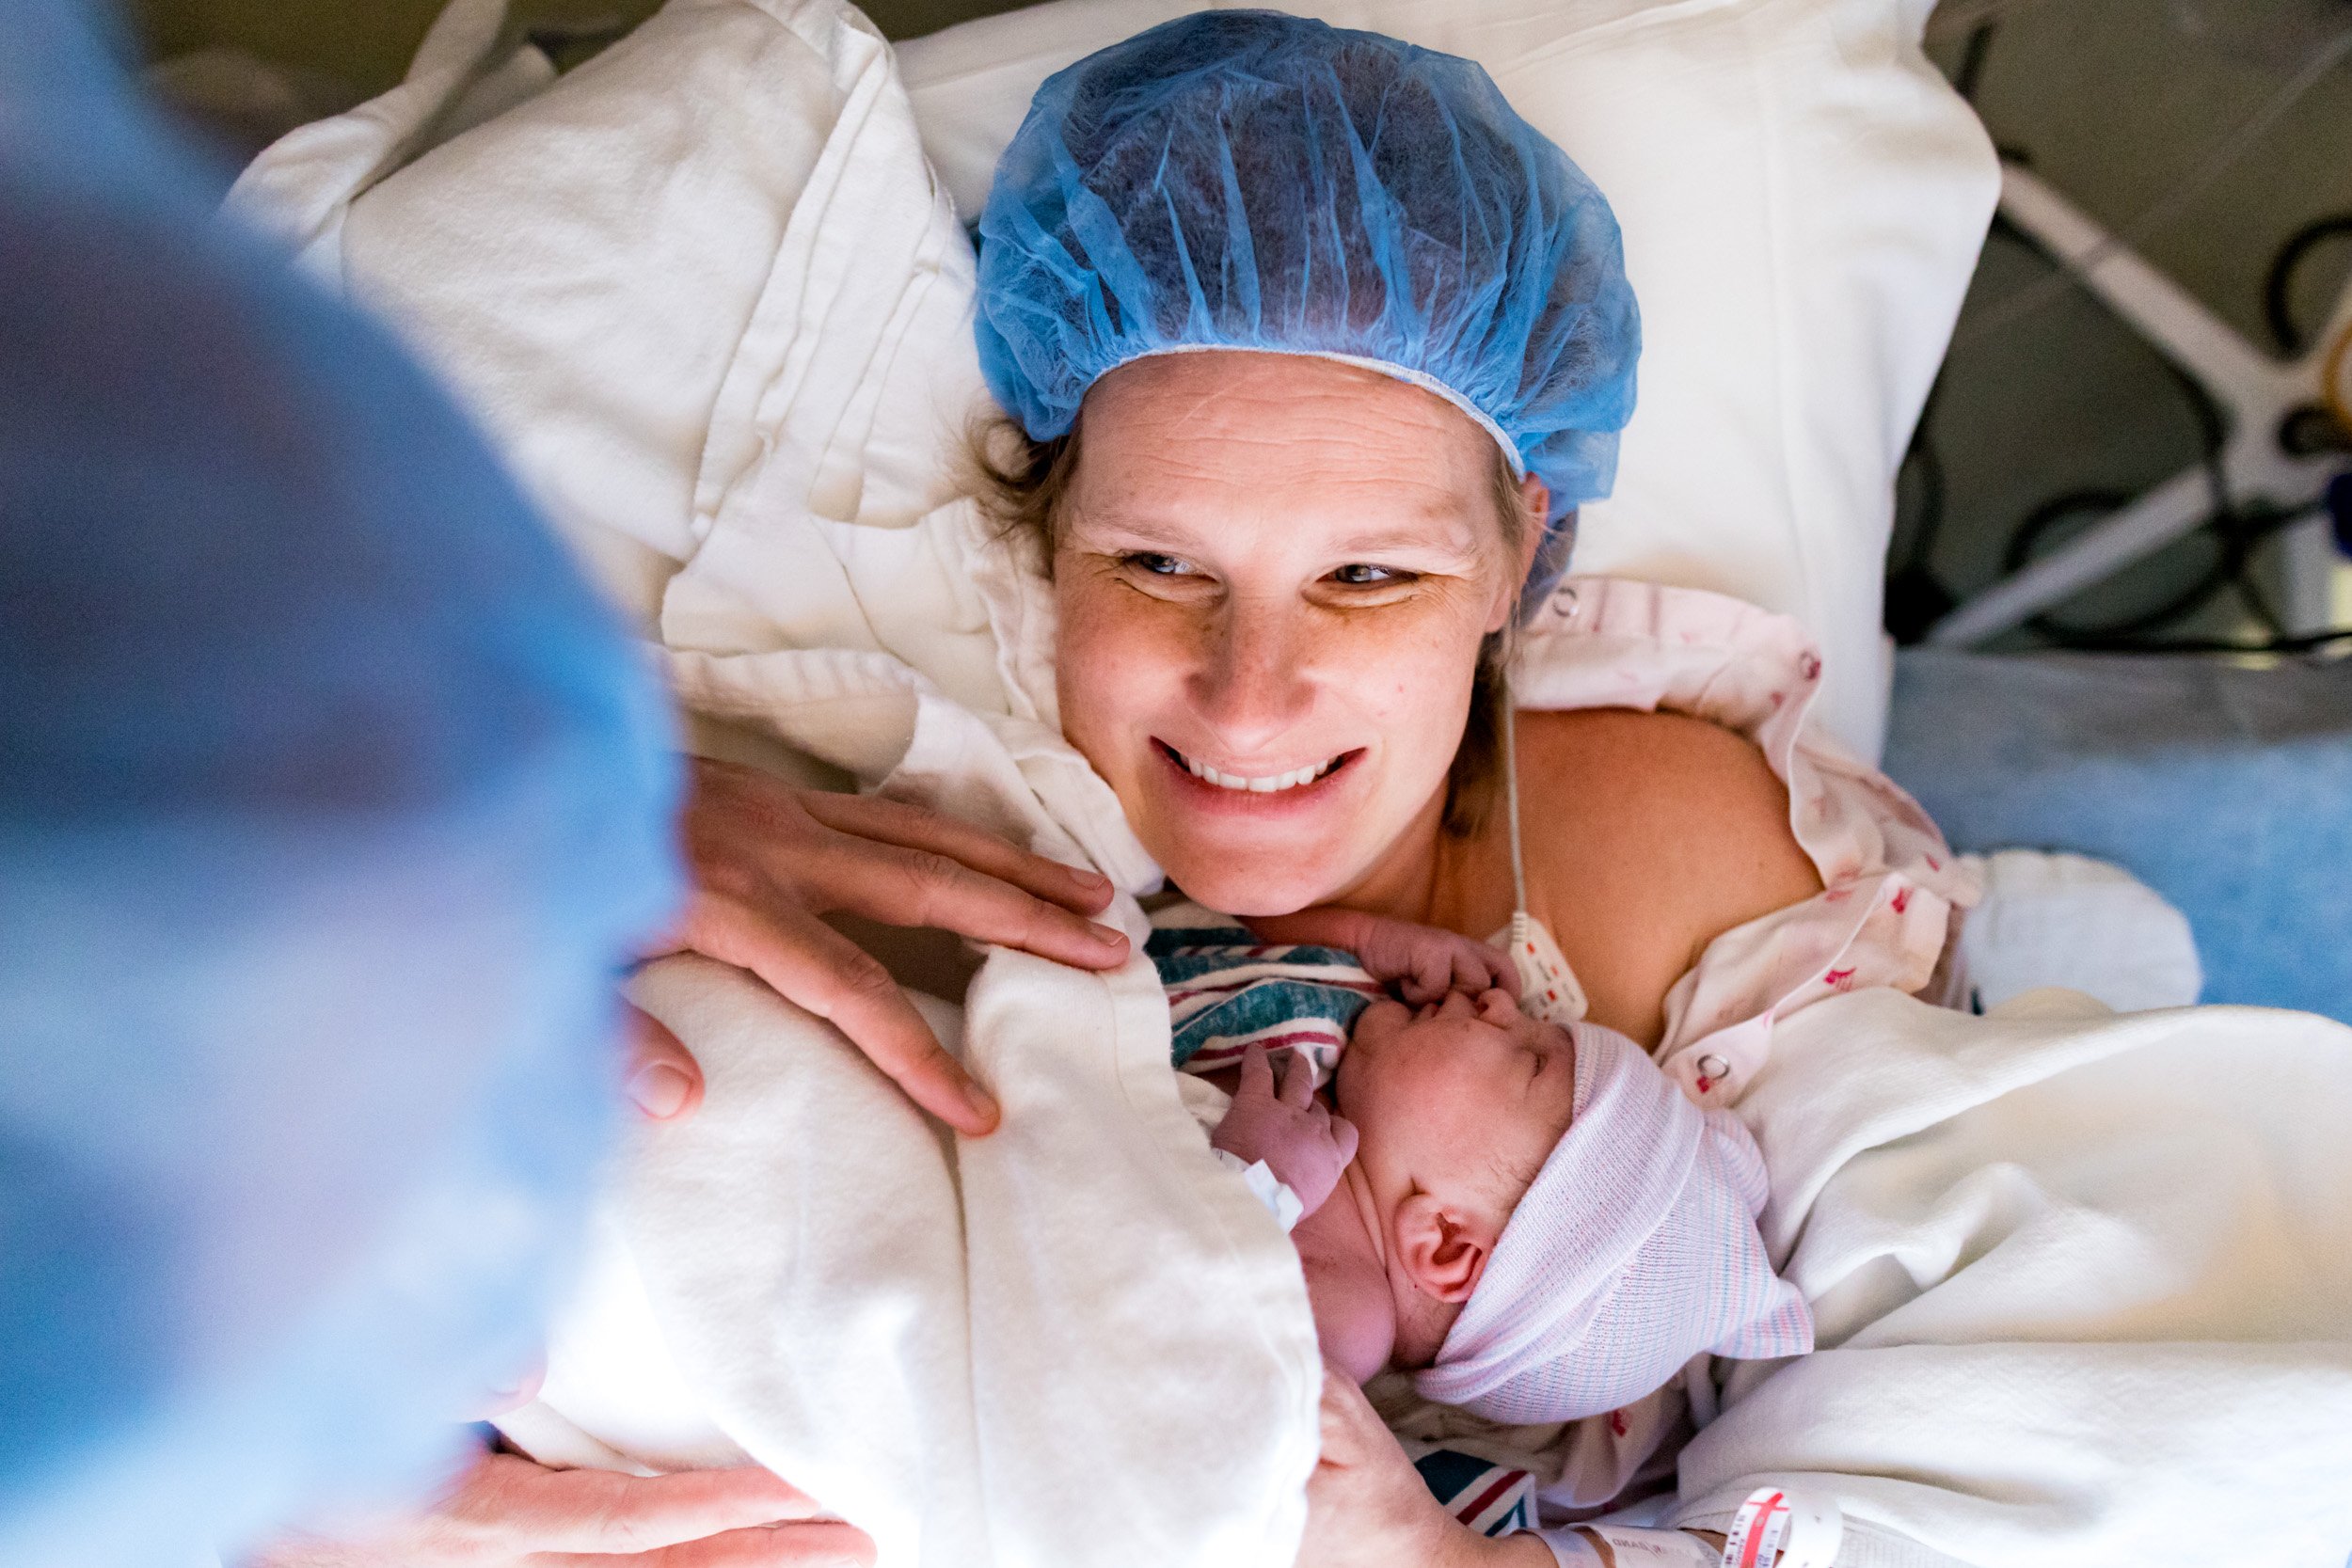 jacksonville birth mom holding her newborn baby just after birth and smiling while looking at her husband